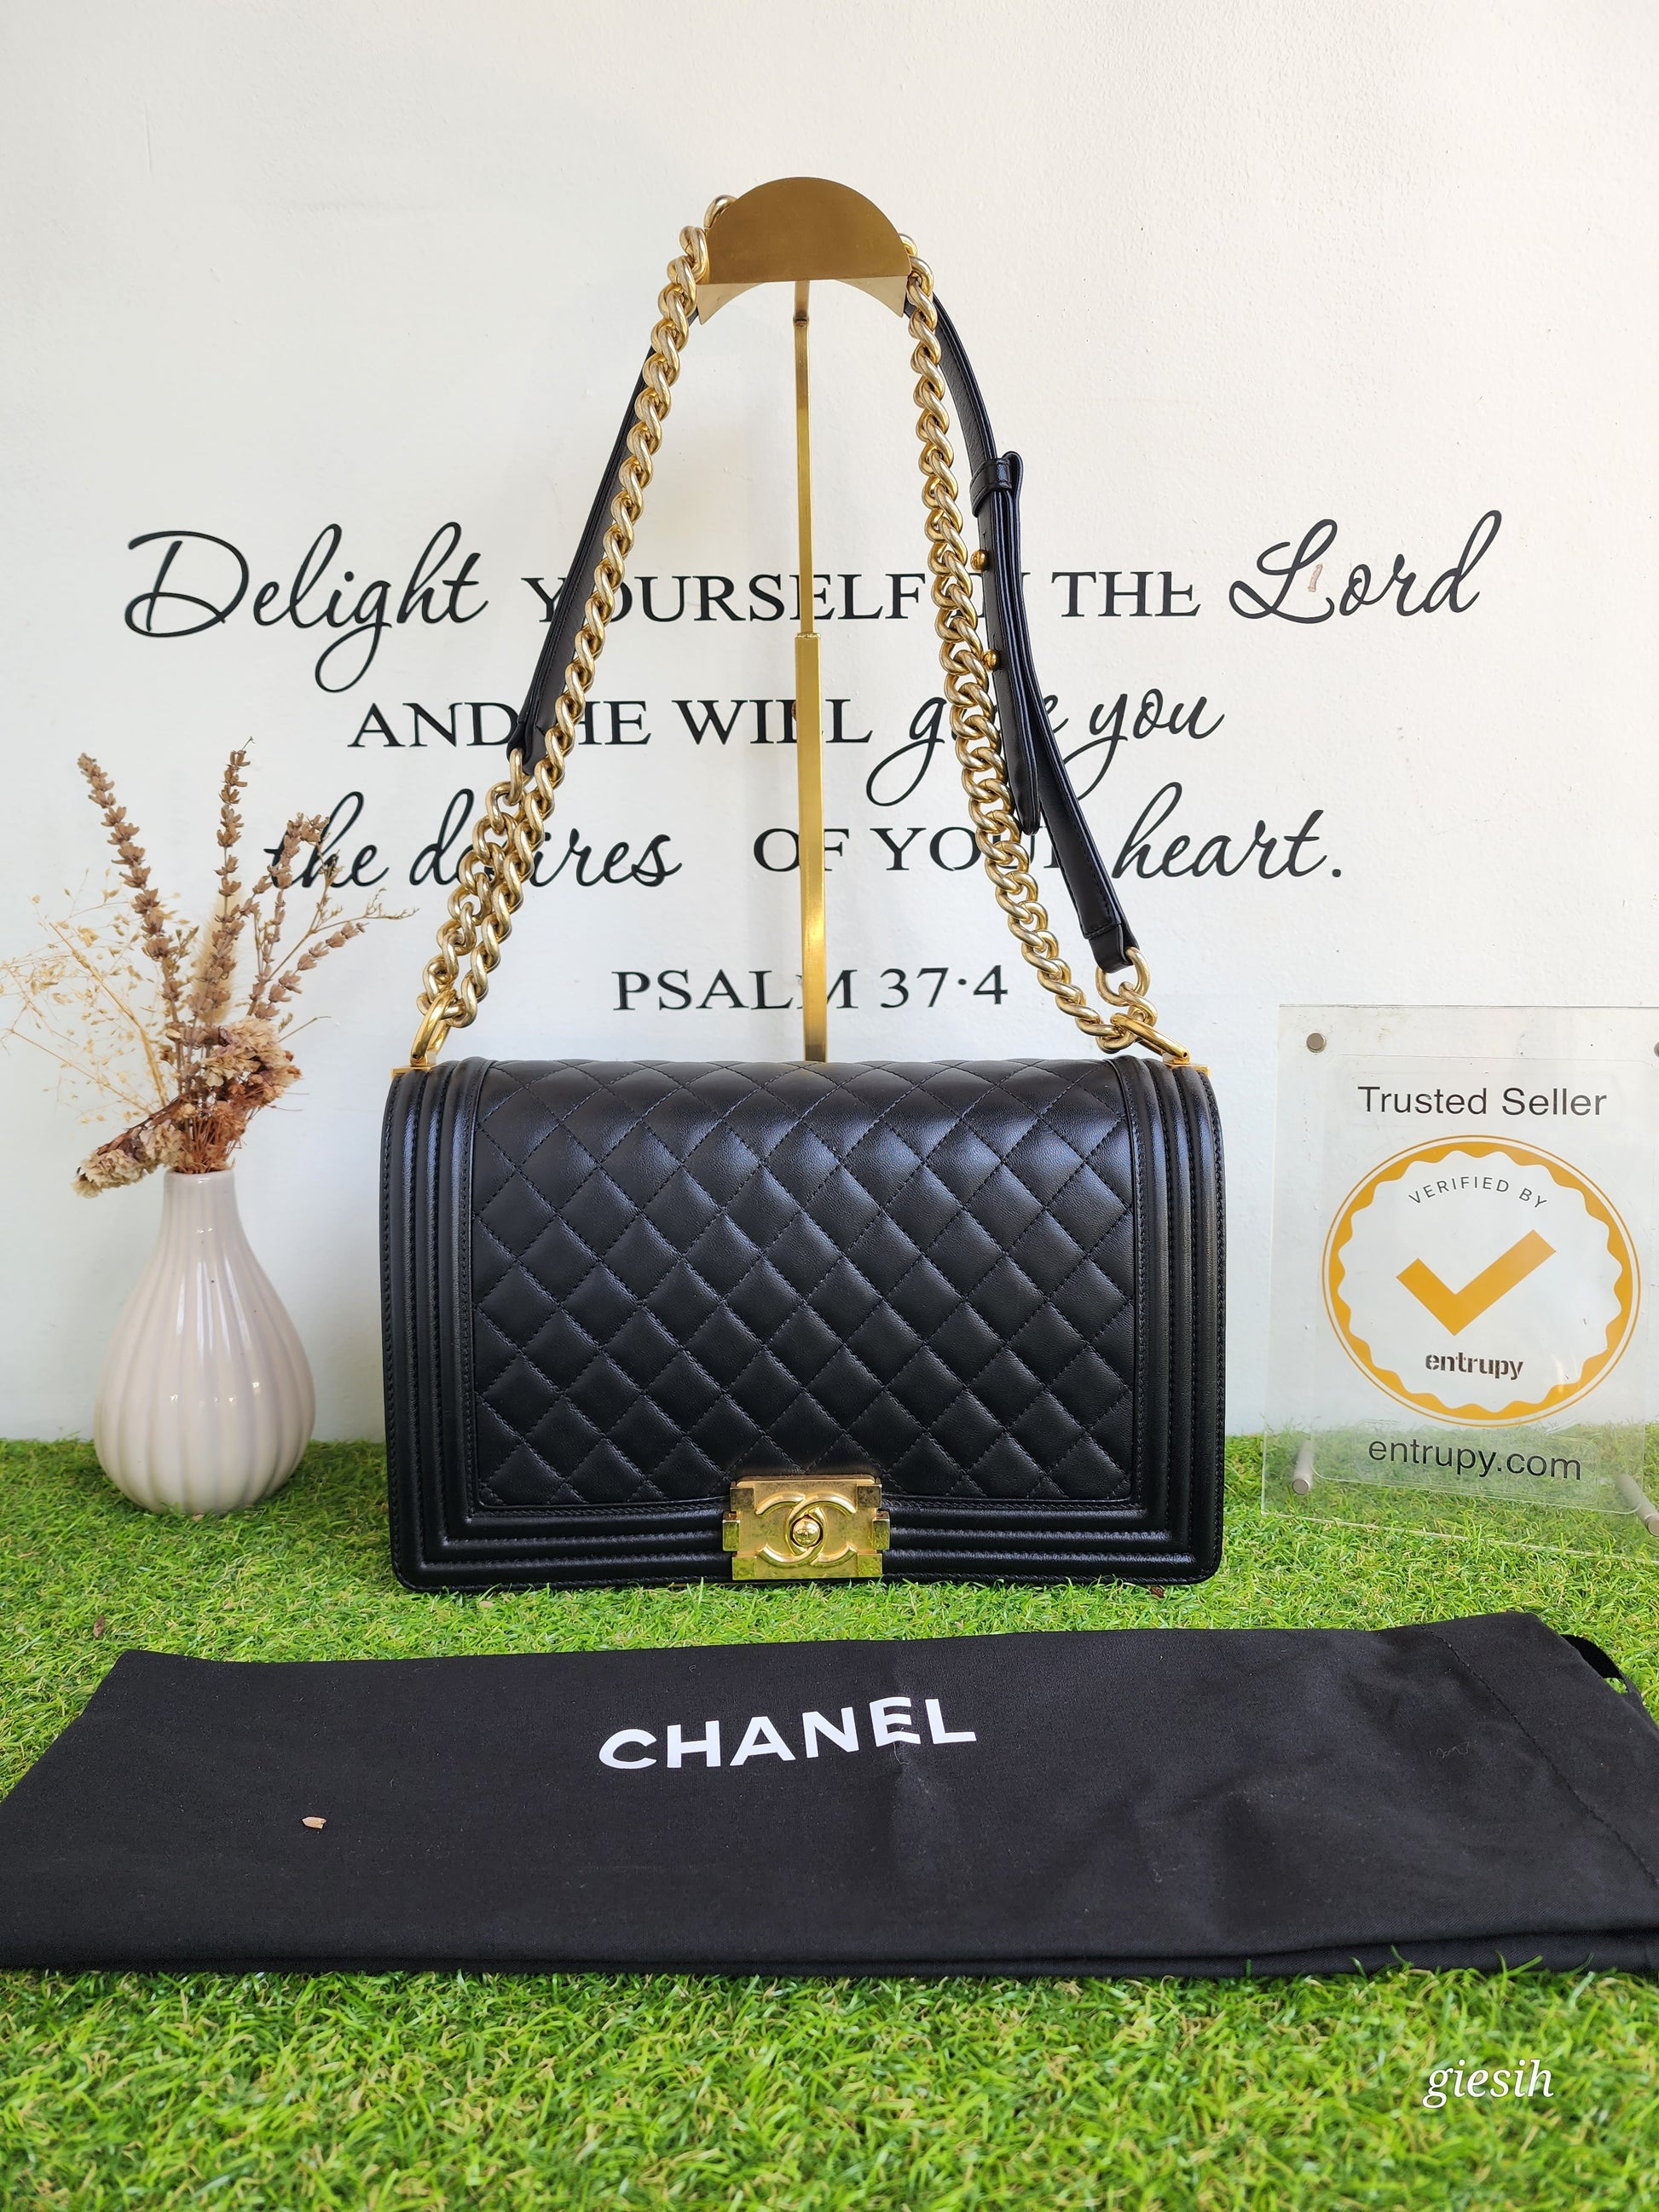 Chanel 18P Le Boy Old Medium Grey Caviar with brushed gold hardware -  VLuxeStyle